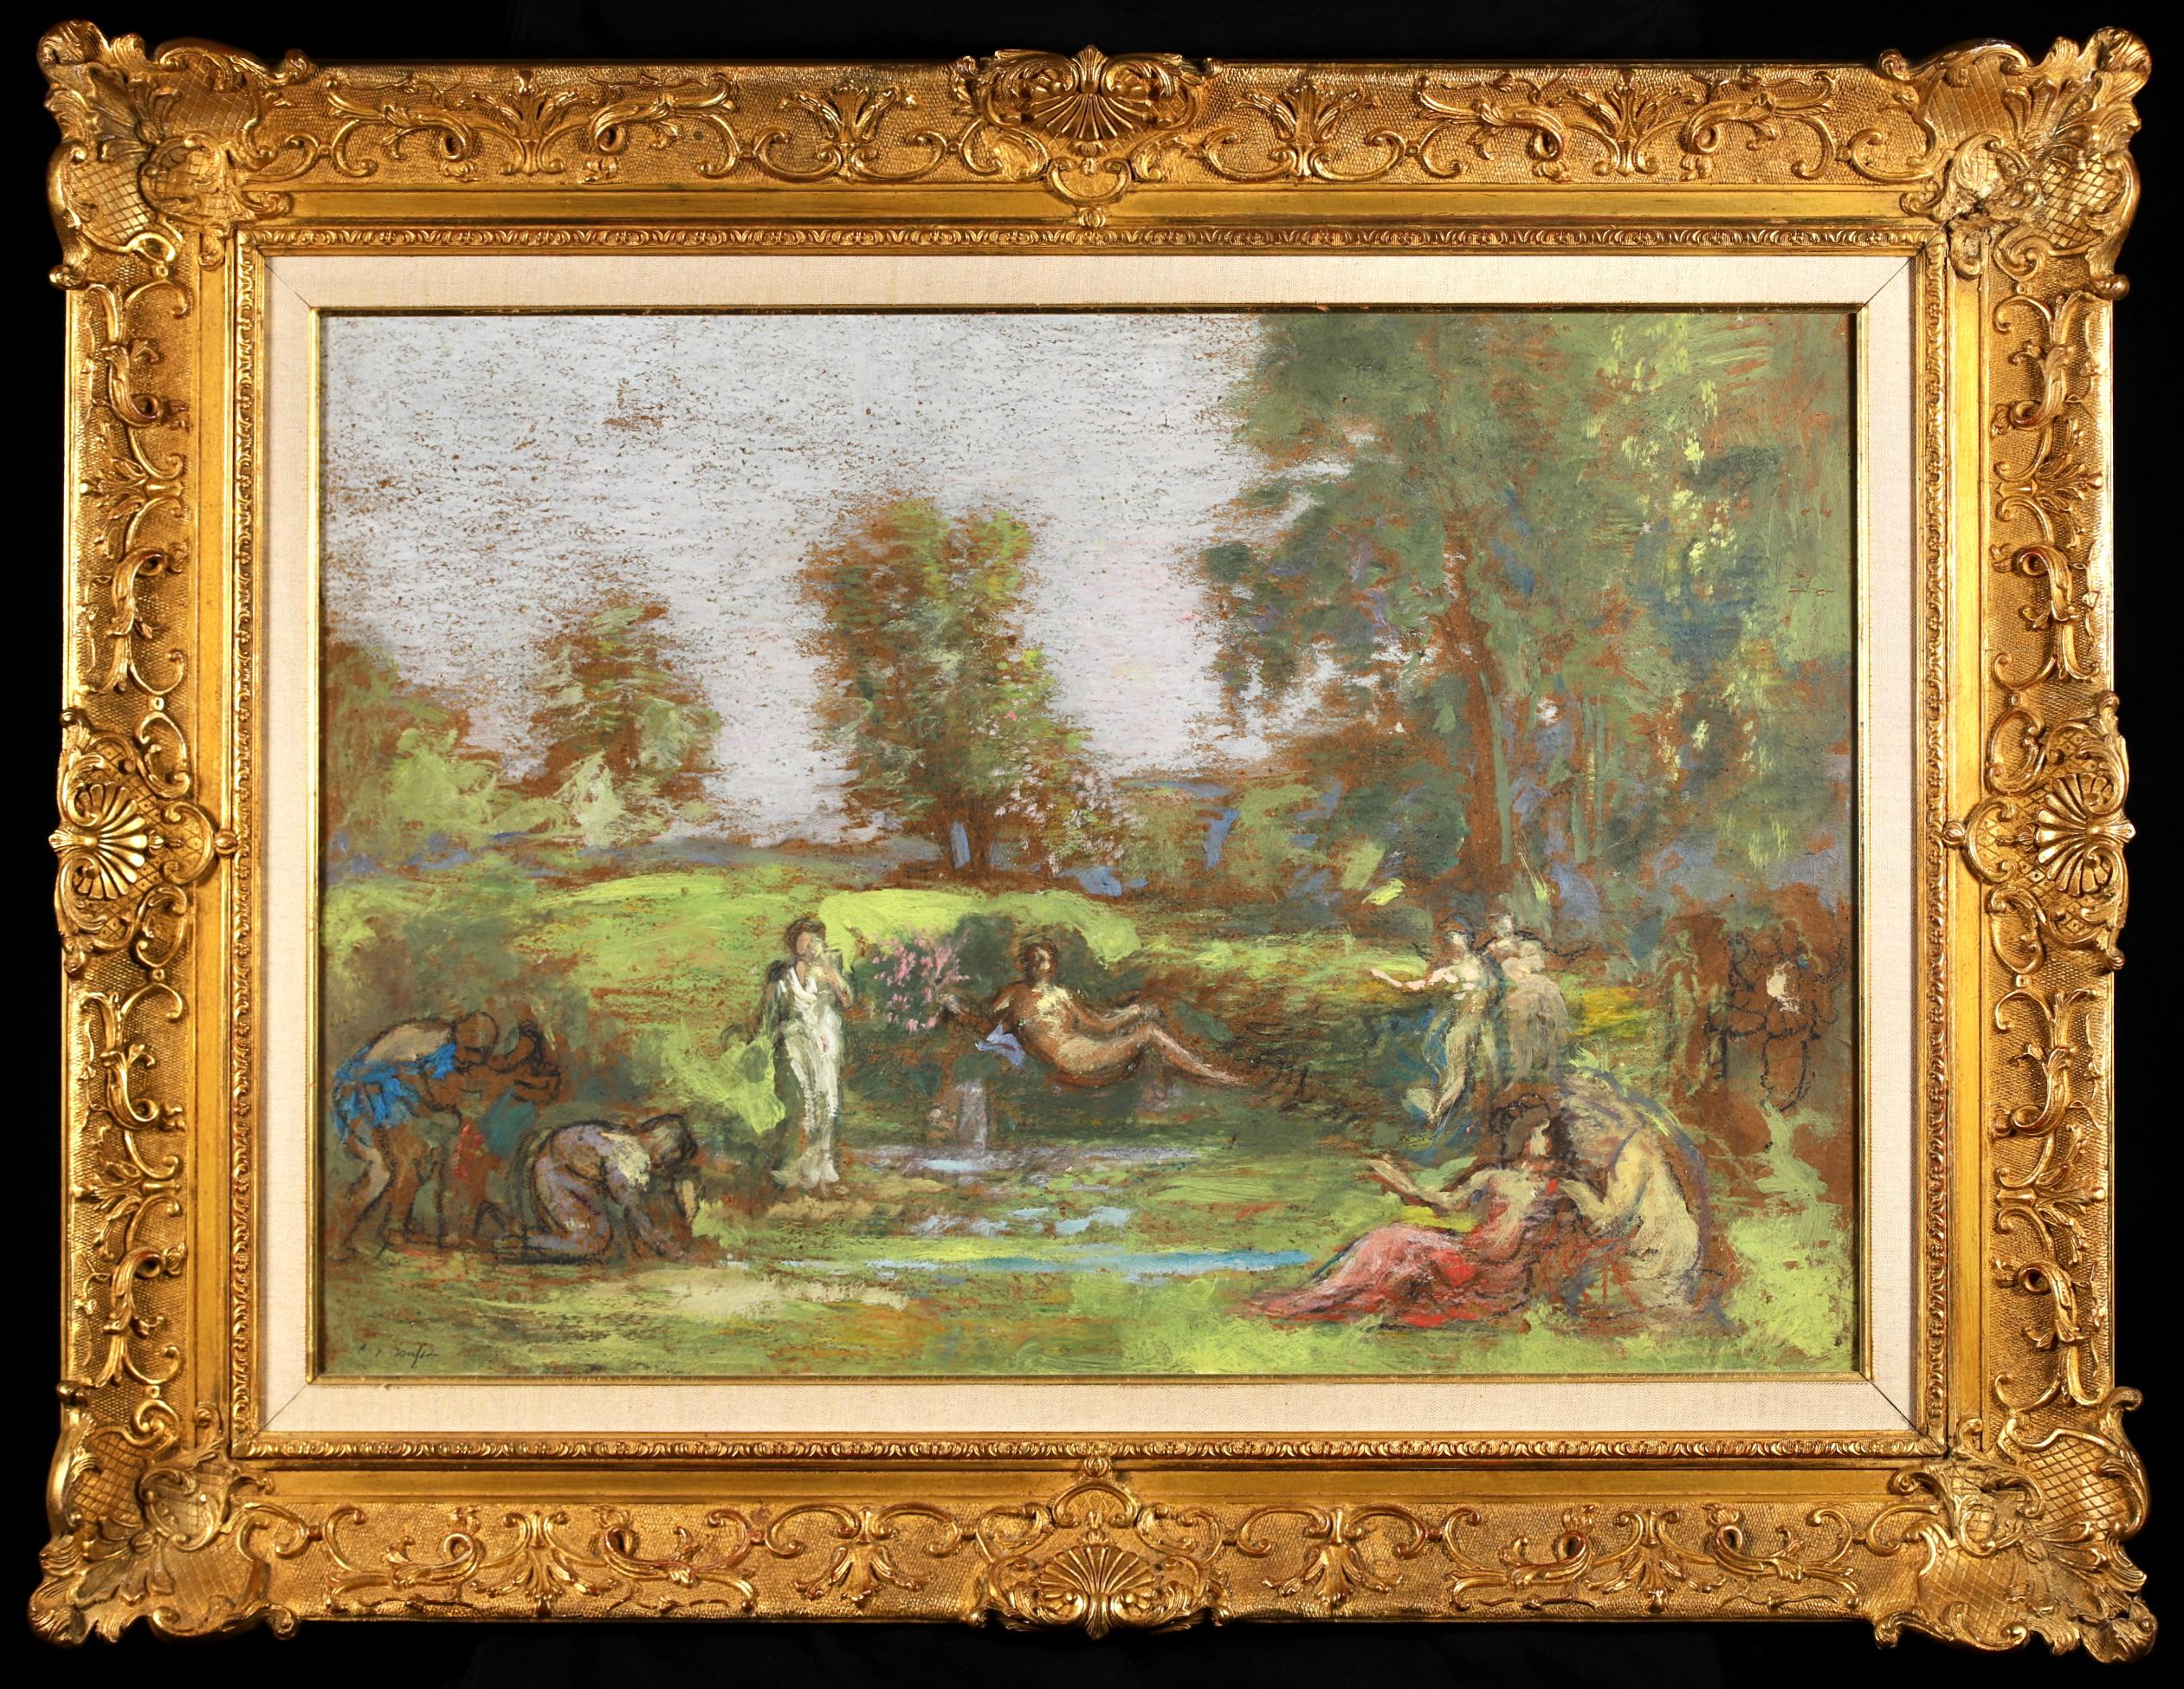 Signed symbolist oil on panel circa 1910 by French Les Nabis painter Ker-Xavier Roussel. This beautiful  painting depicts nudes and figures dressed in robes in a wooded landscape.

Signature:
Signed lower left

Dimensions:
Framed: 31"x40"
Unframed: